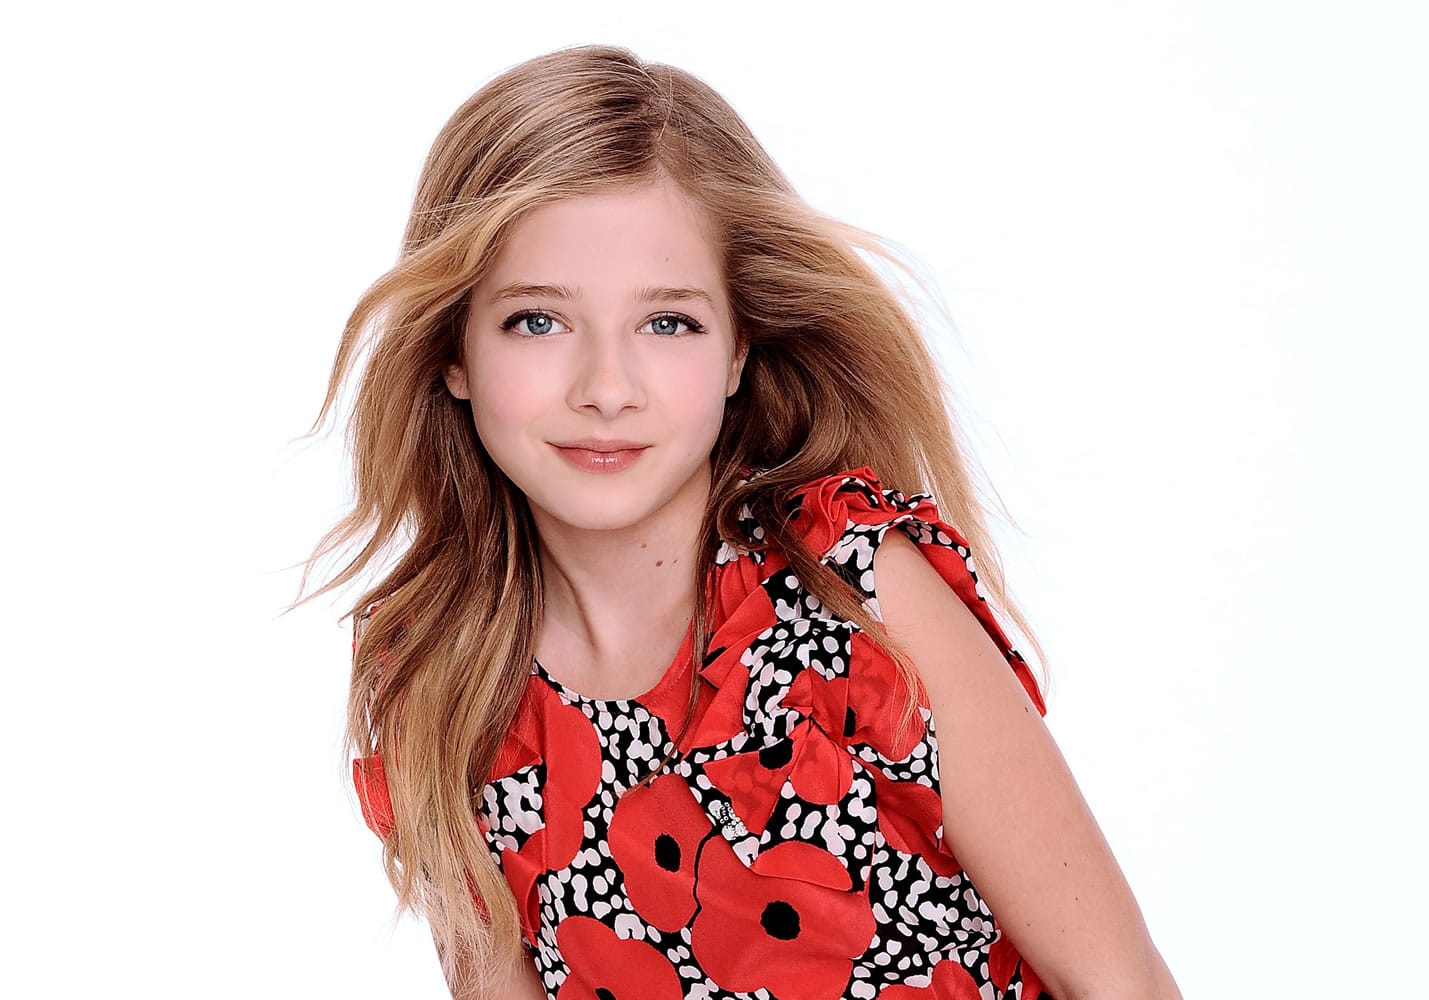 13-year-old crossover classical singer Jackie Evancho will perform with the Oregon Symphony Nov. 30, 2013 at the Arlene Schnitzer Concert Hall in Portland.